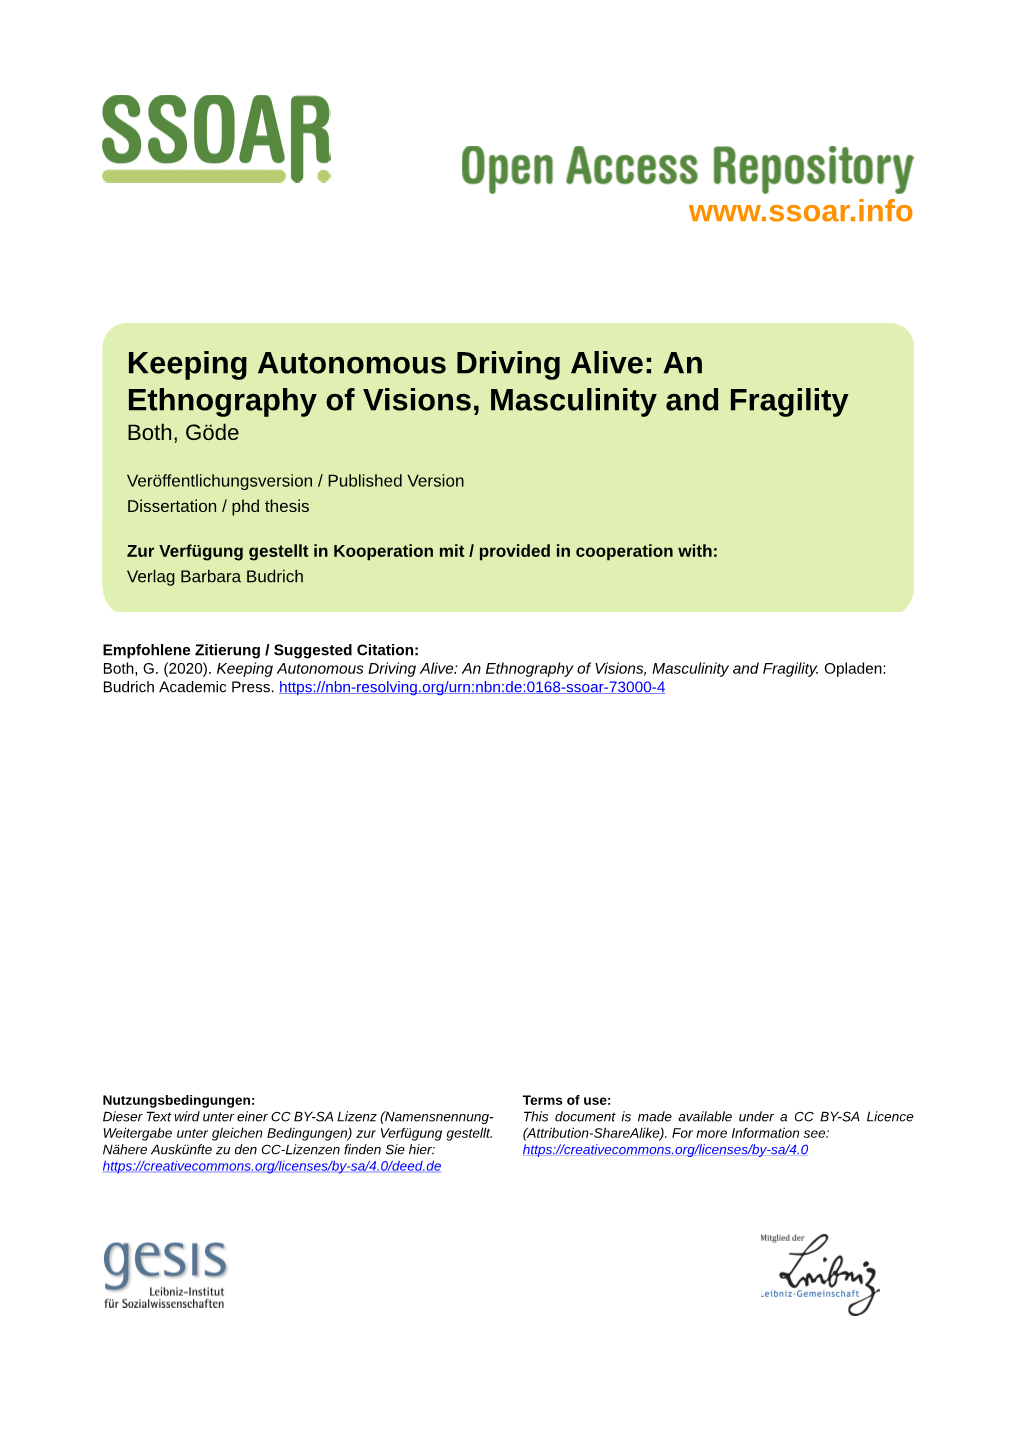 Keeping Autonomous Driving Alive: an Ethnography of Visions, Masculinity and Fragility Both, Göde